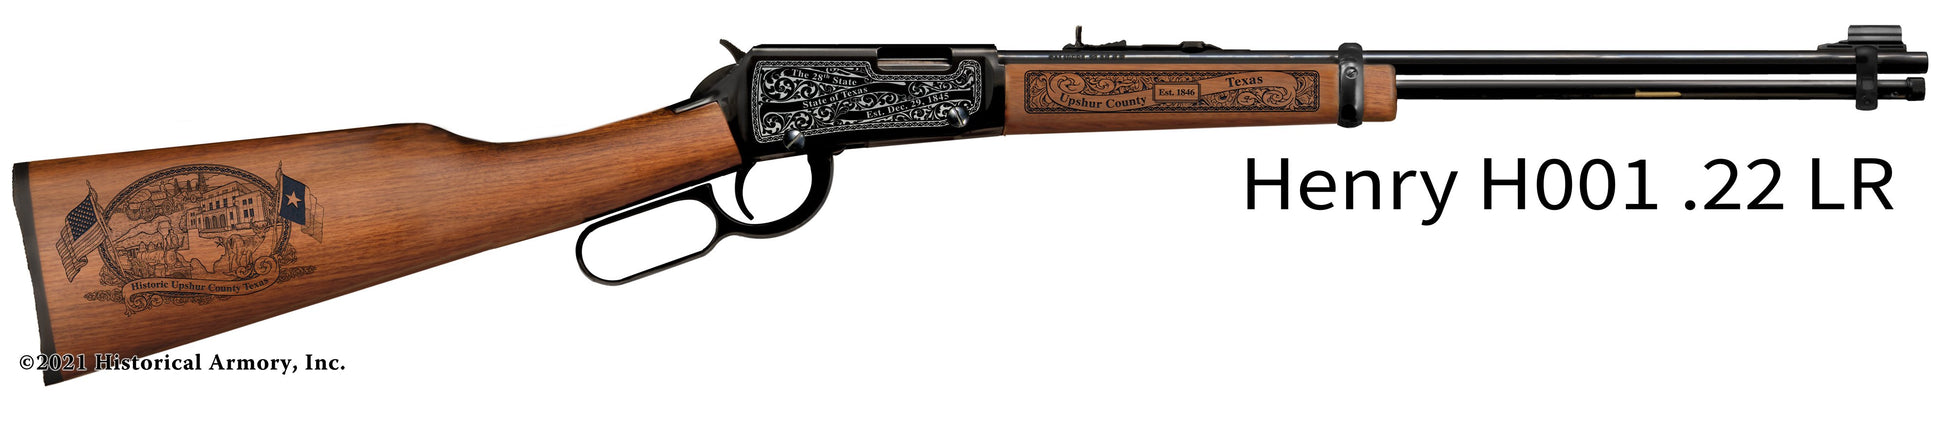 Upshur County Texas Engraved Henry H001 Rifle